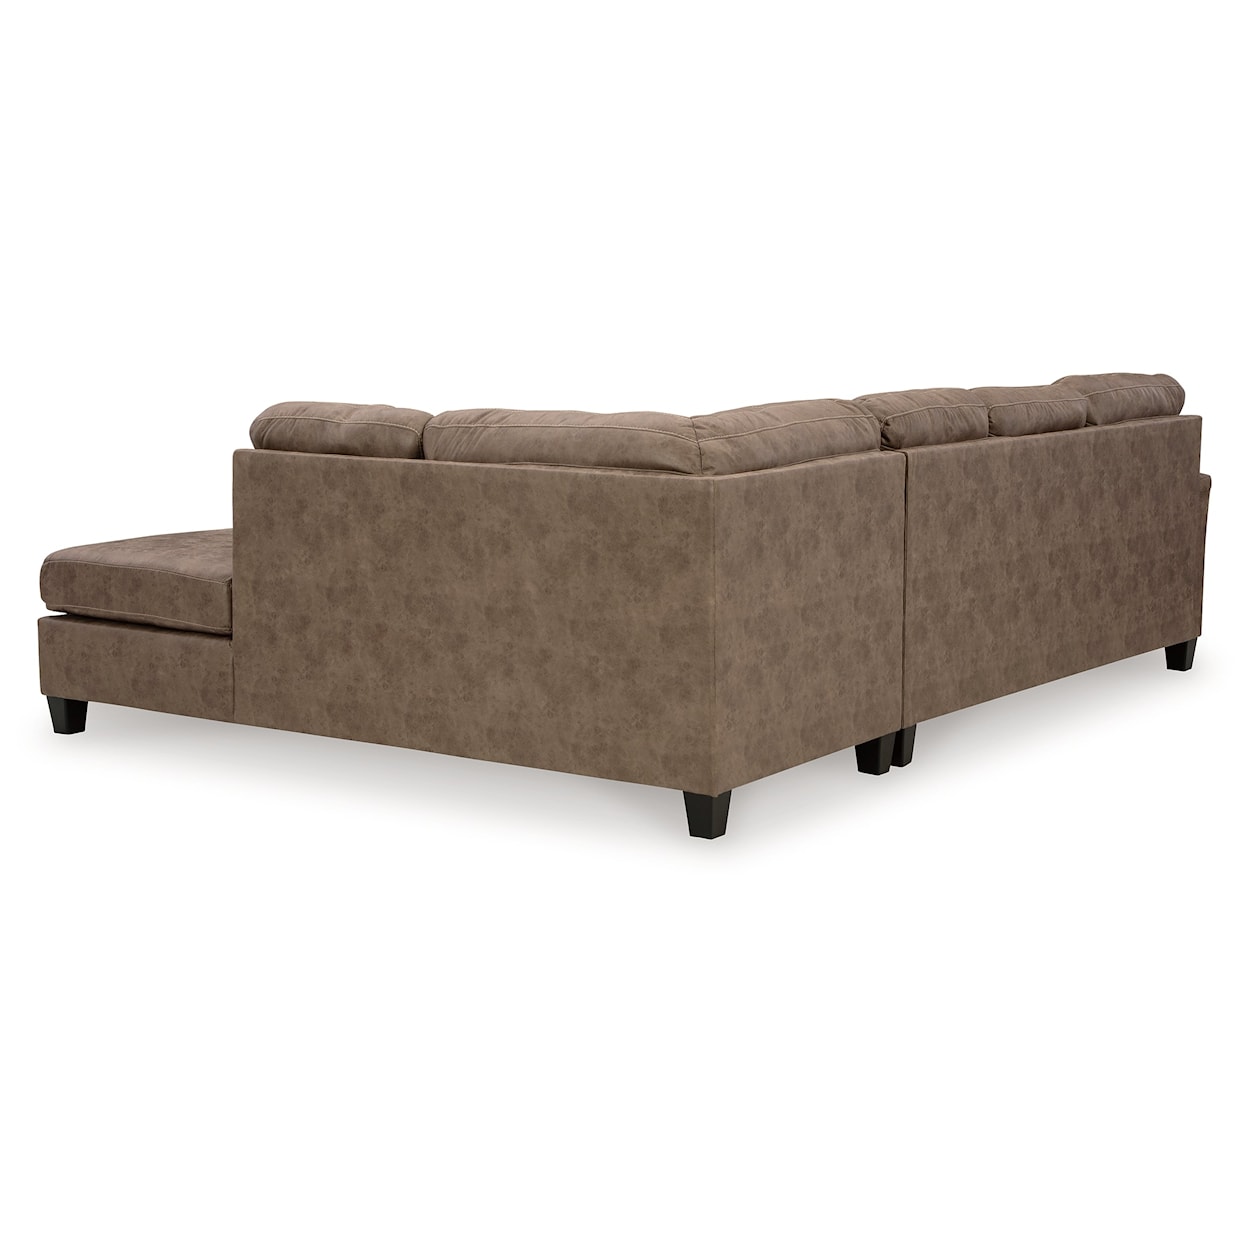 Signature Design Navi Sectional w/ Sleeper and Chaise